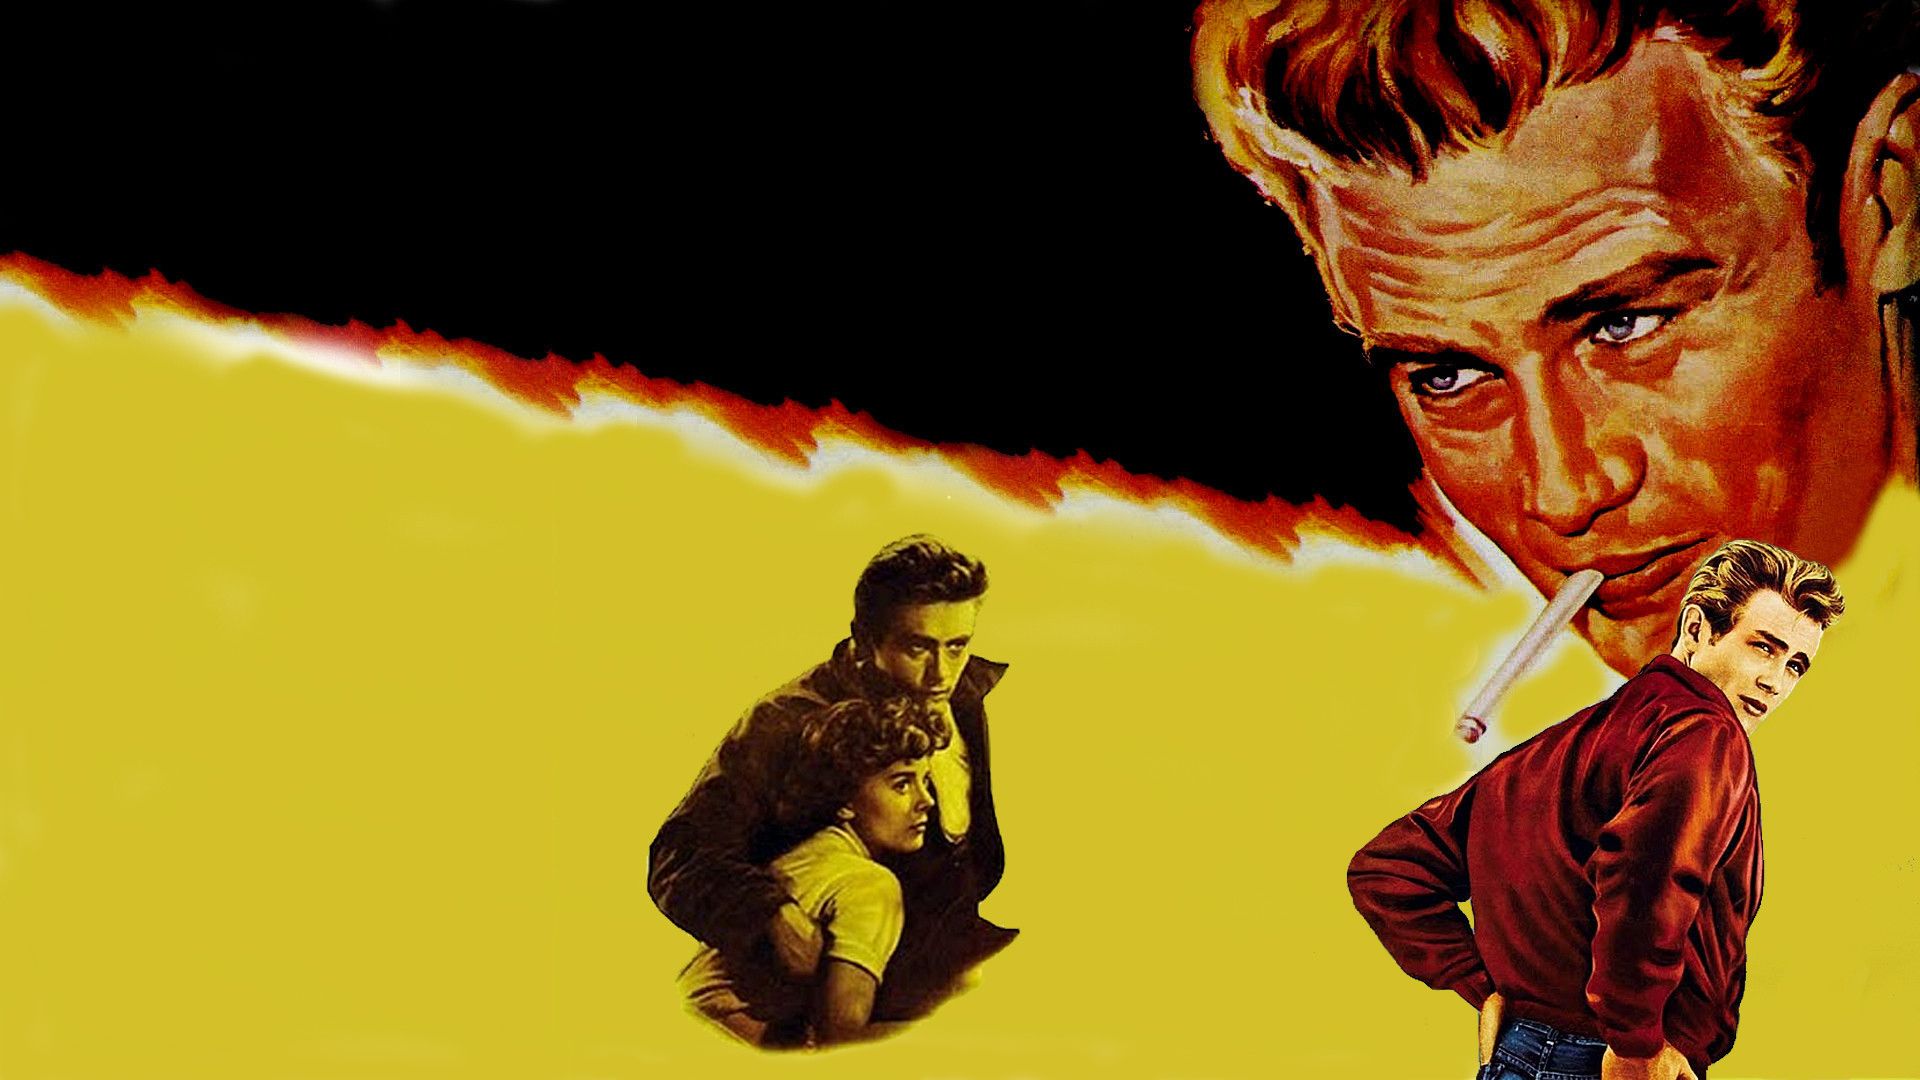 Rebel Without a Cause background